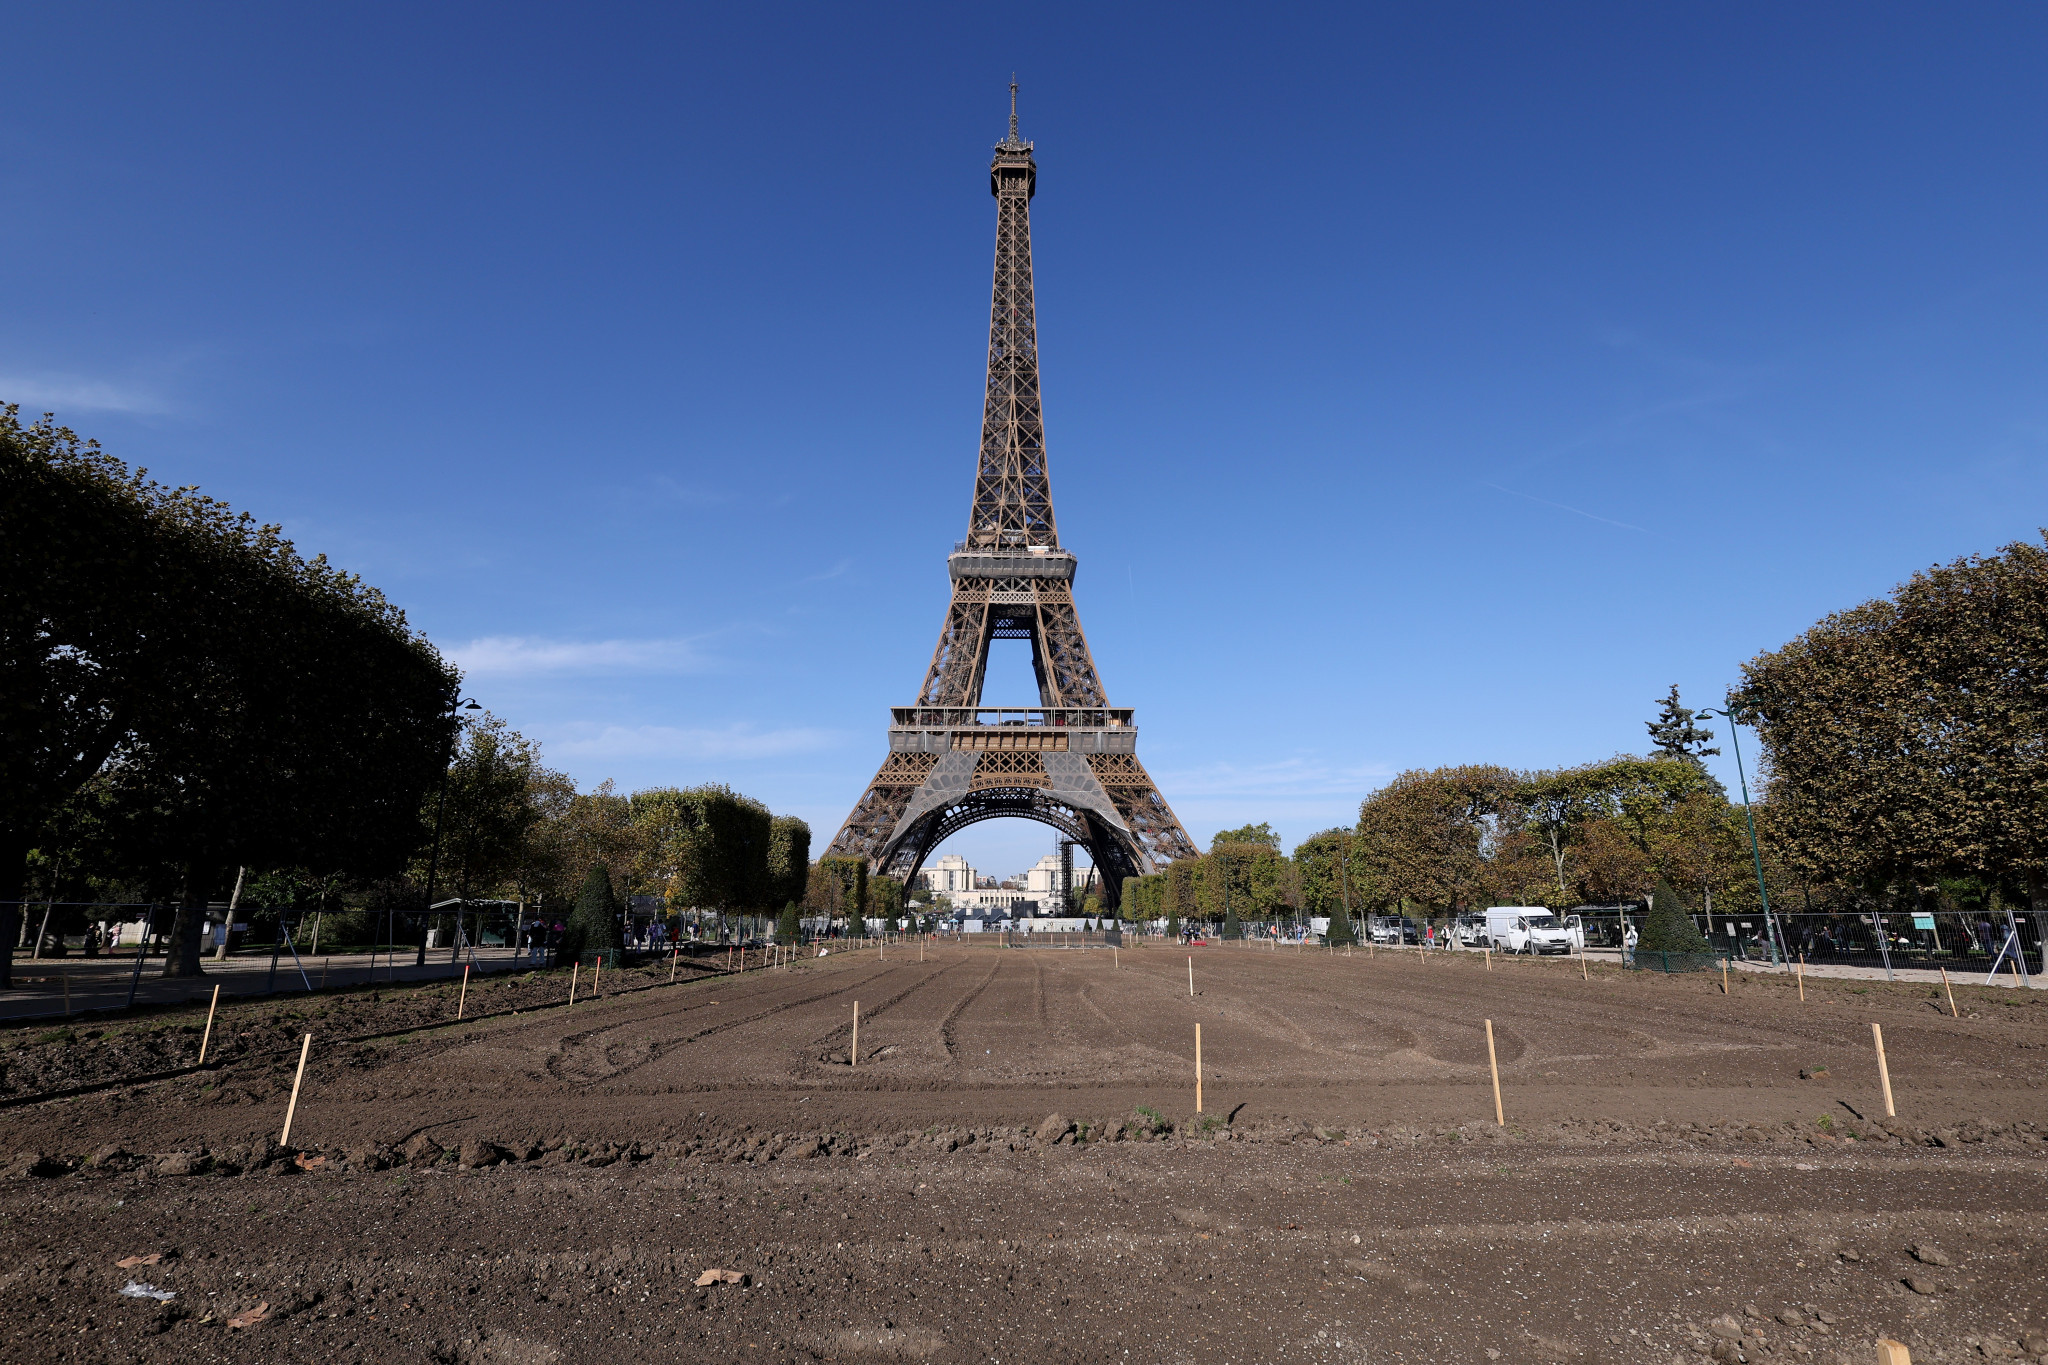 An urban beach is being constructed on the shores of the Seine. GETTY IMAGES